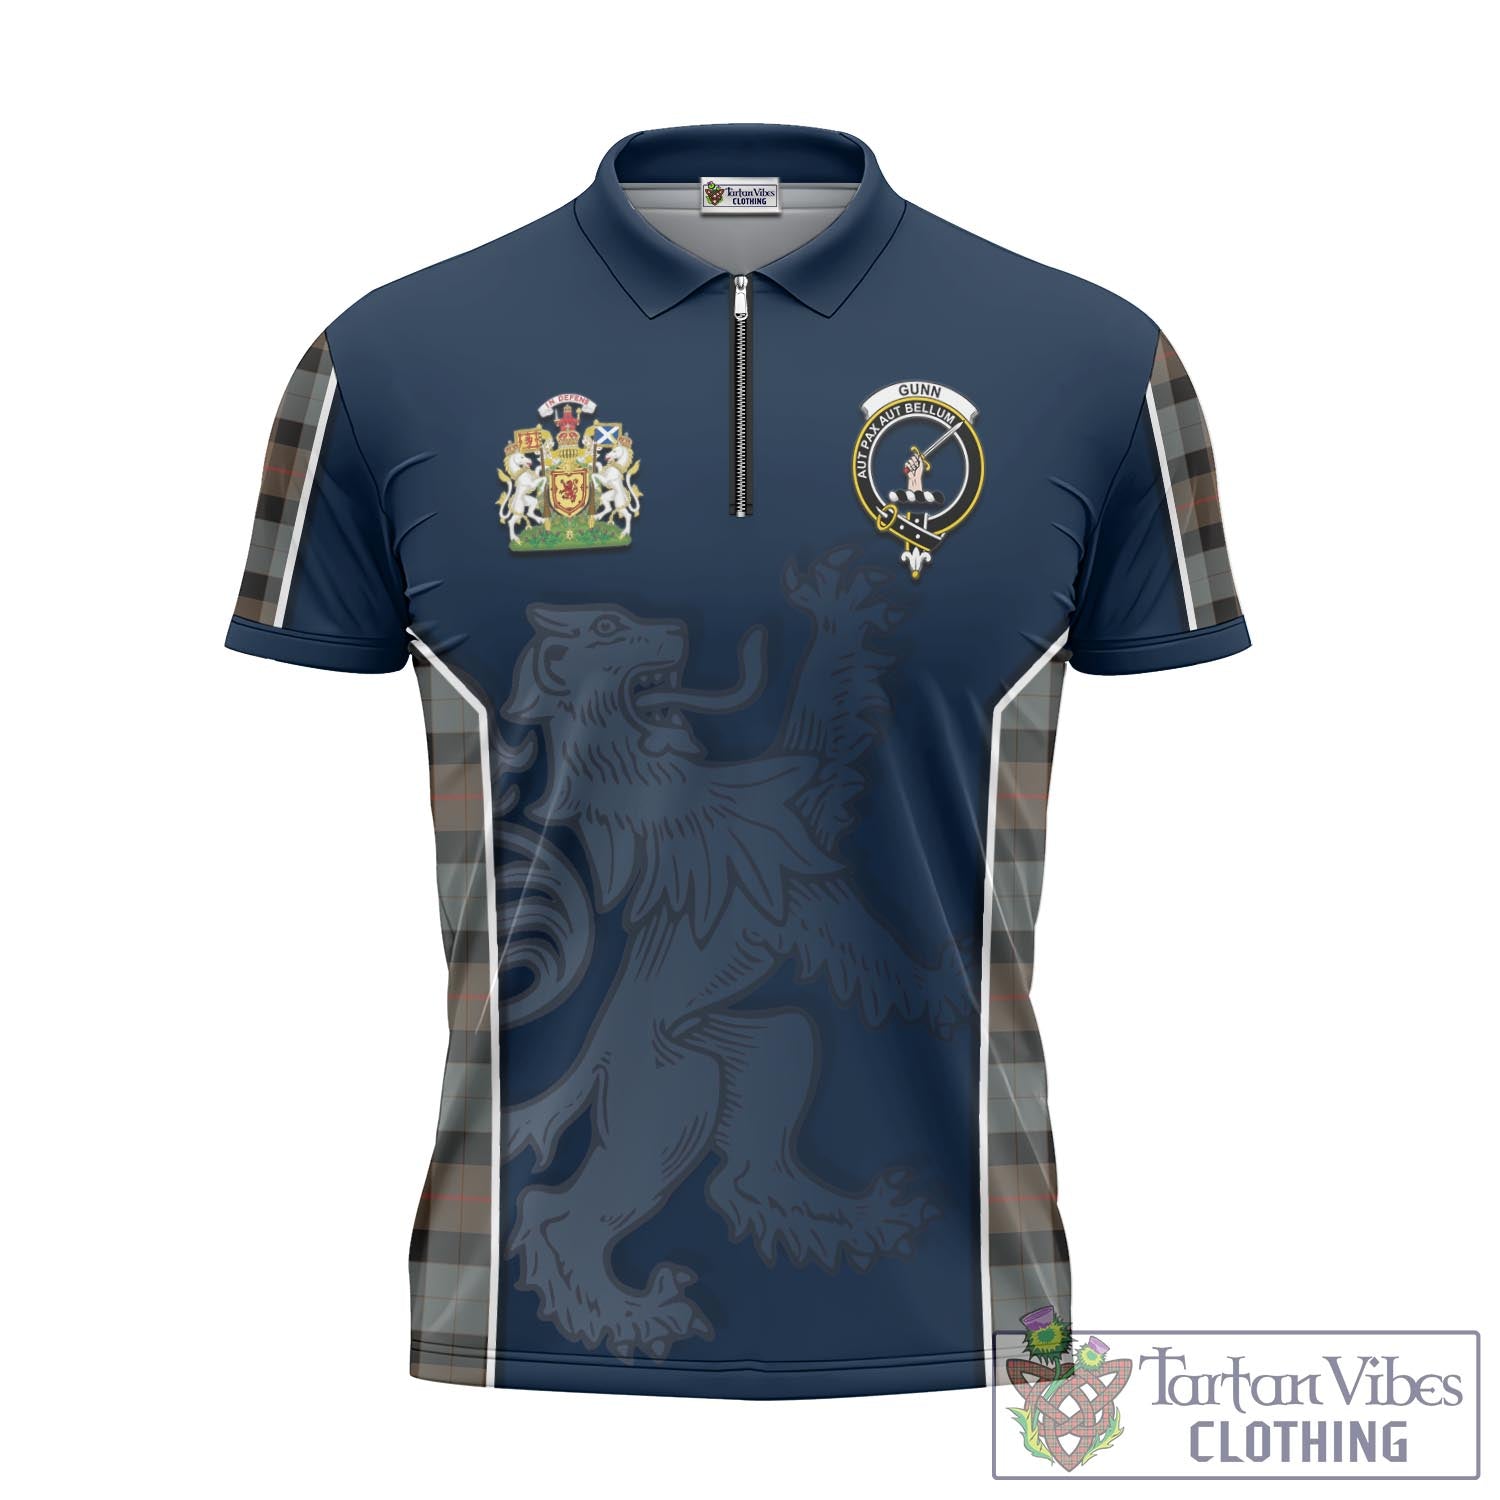 Tartan Vibes Clothing Gunn Weathered Tartan Zipper Polo Shirt with Family Crest and Lion Rampant Vibes Sport Style